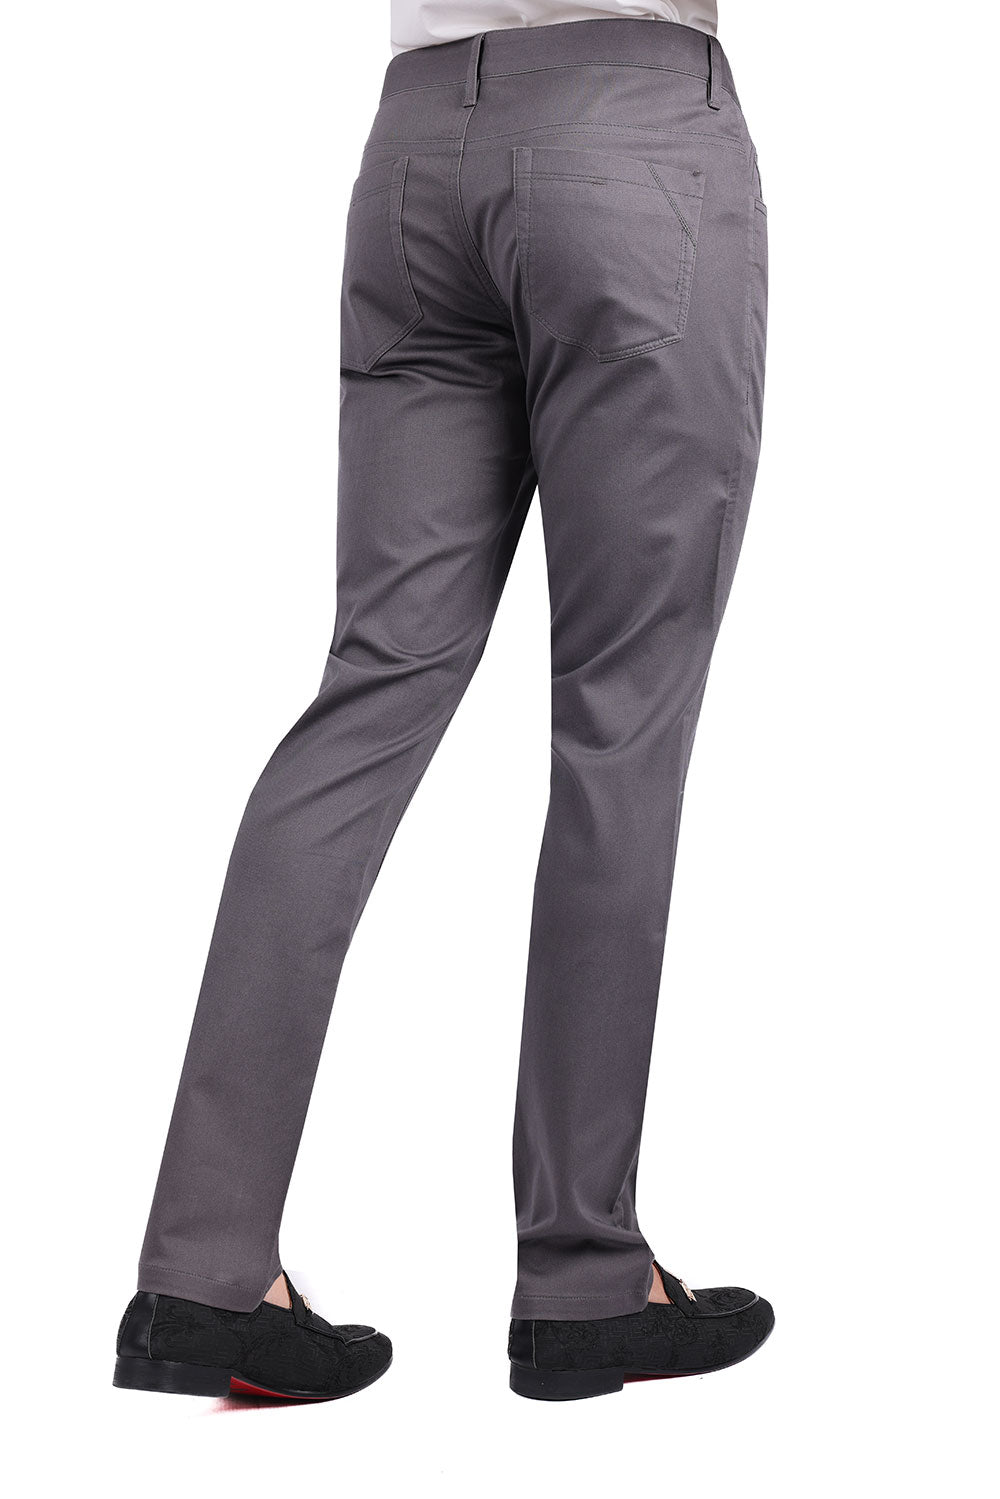 Barabas Men's Solid Color Basic Essential Chino Dress Pants 3CPW30 Grey